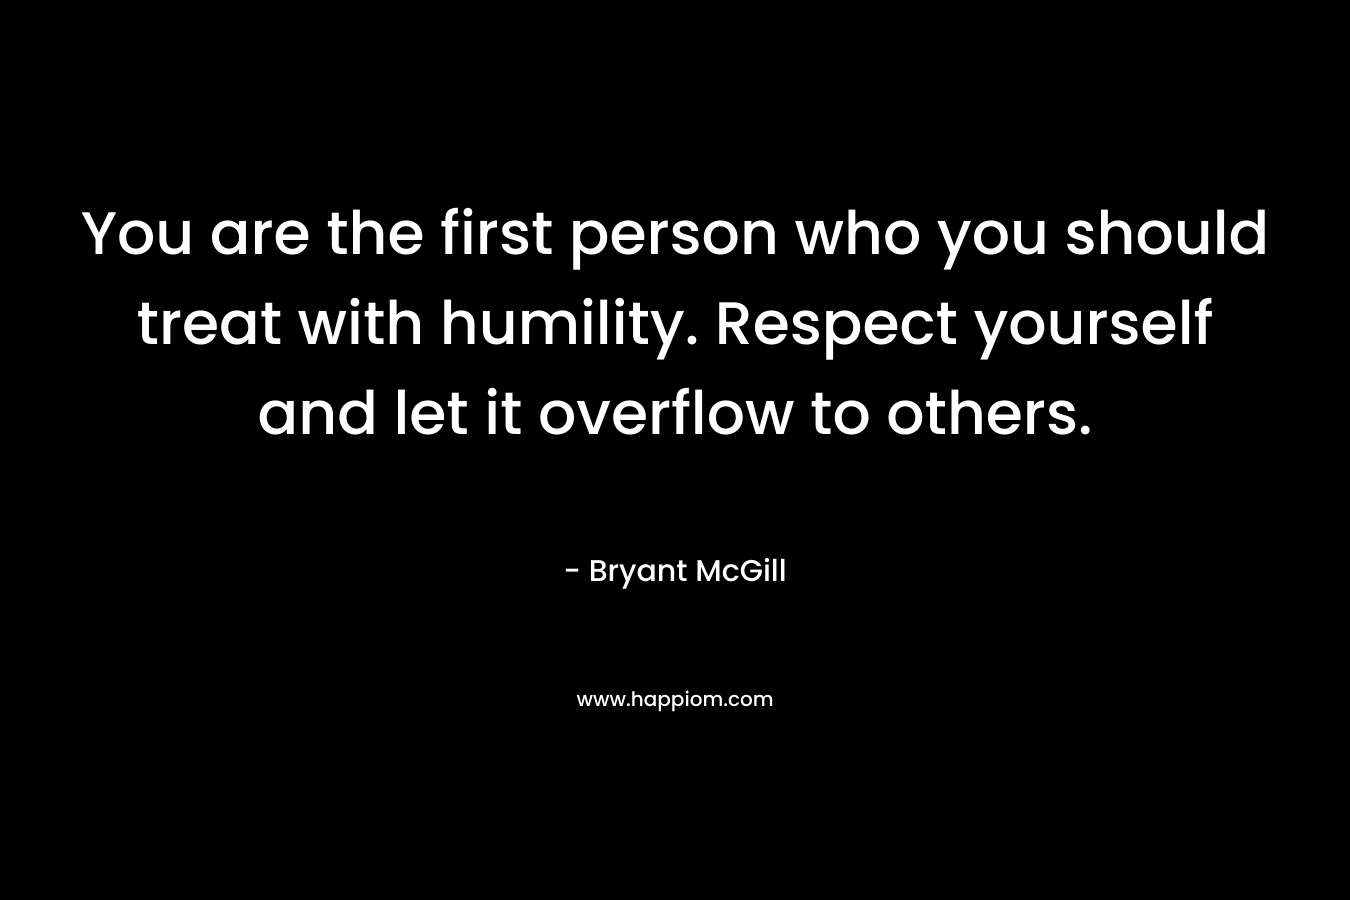 You are the first person who you should treat with humility. Respect yourself and let it overflow to others. – Bryant McGill